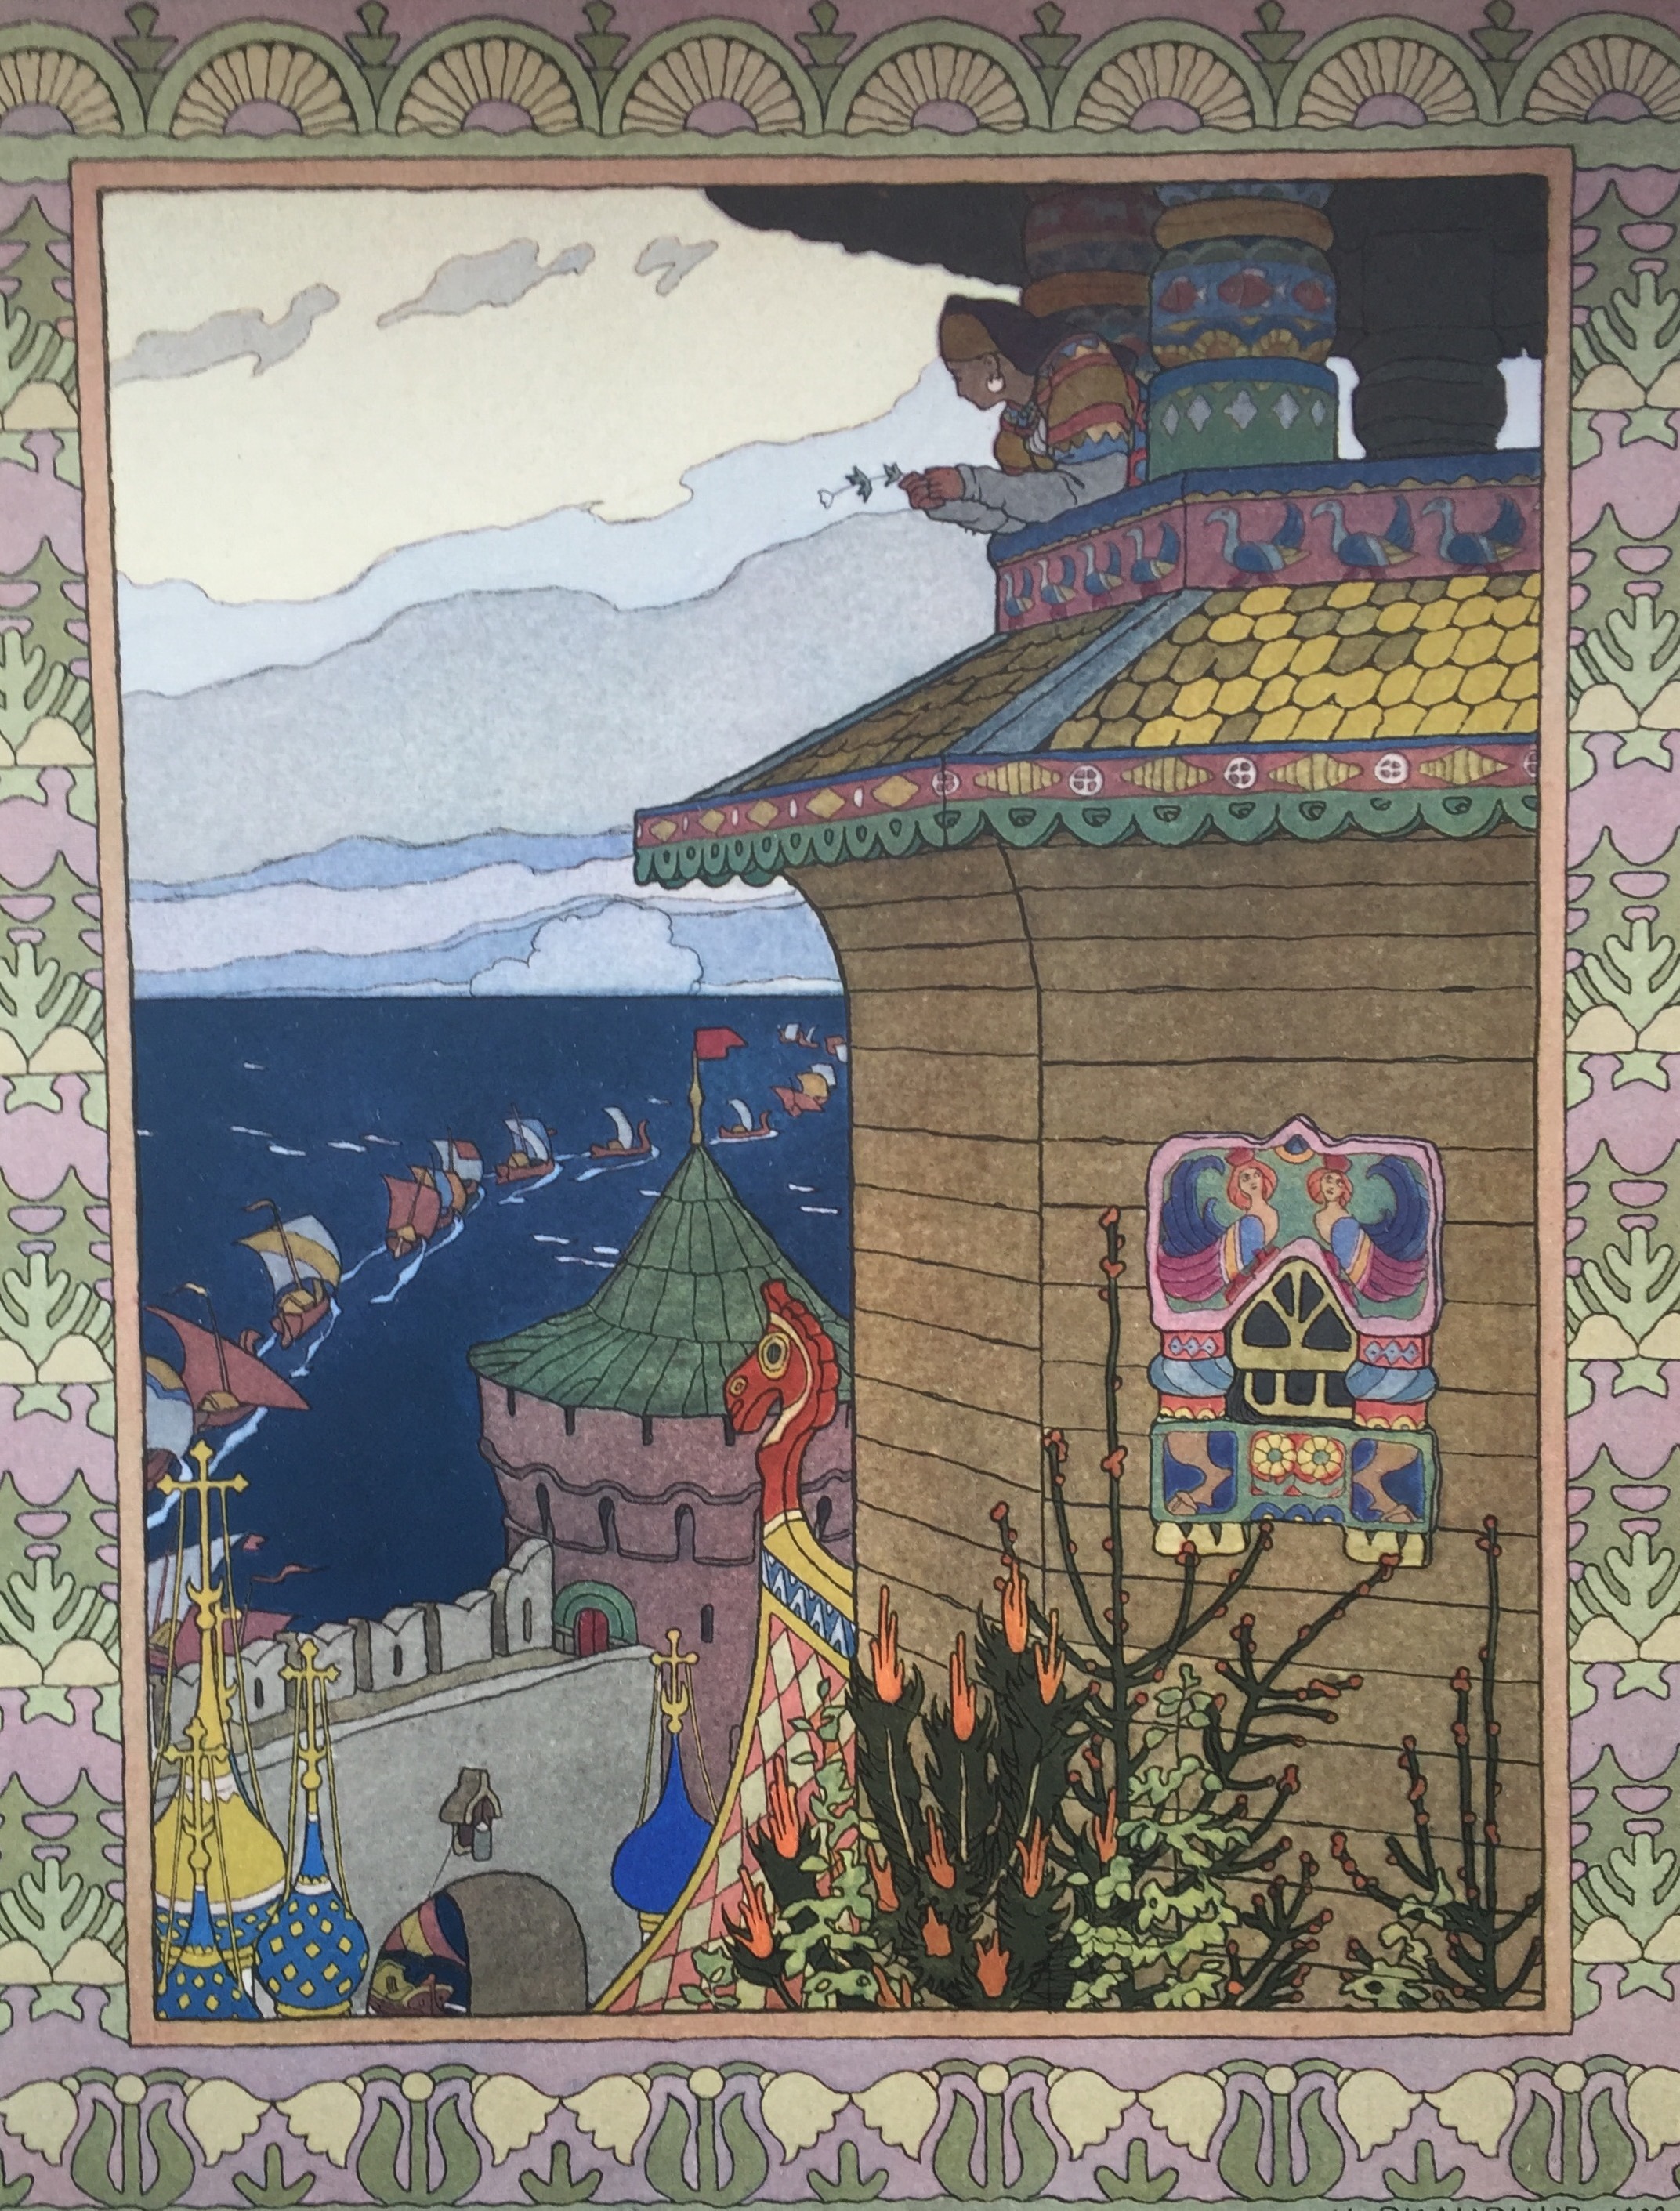 The royal housewife queen watches her husband sail away. From from The Little White Duck, a Russian Fairy Tale by Ivan Bilibin.